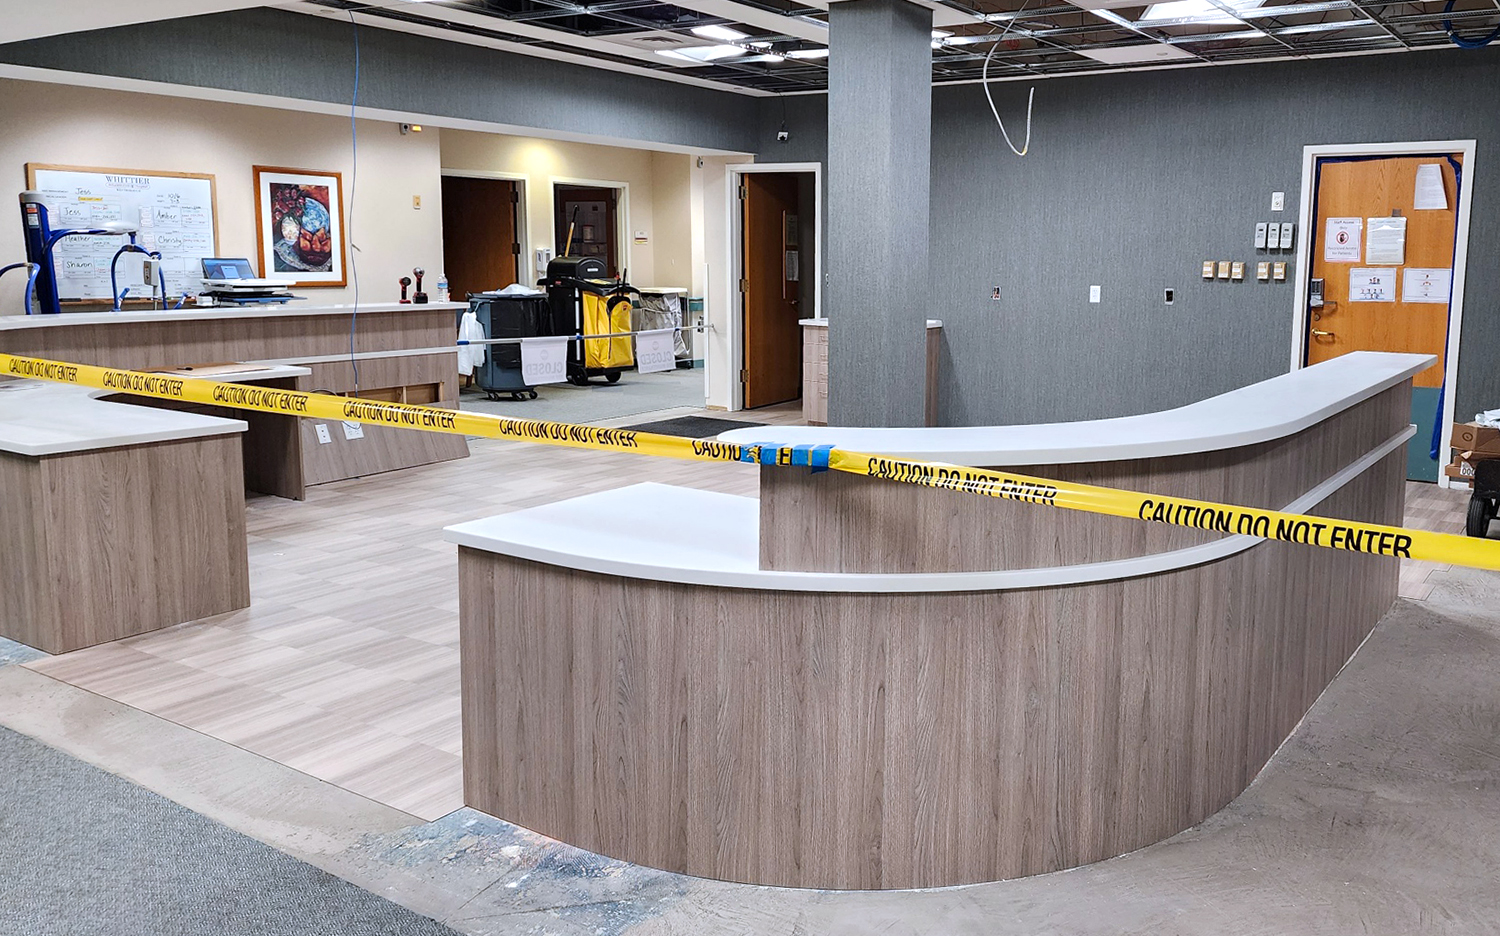 **Updates from our renovation at Whittier Rehabilitation Hospital Westborough**